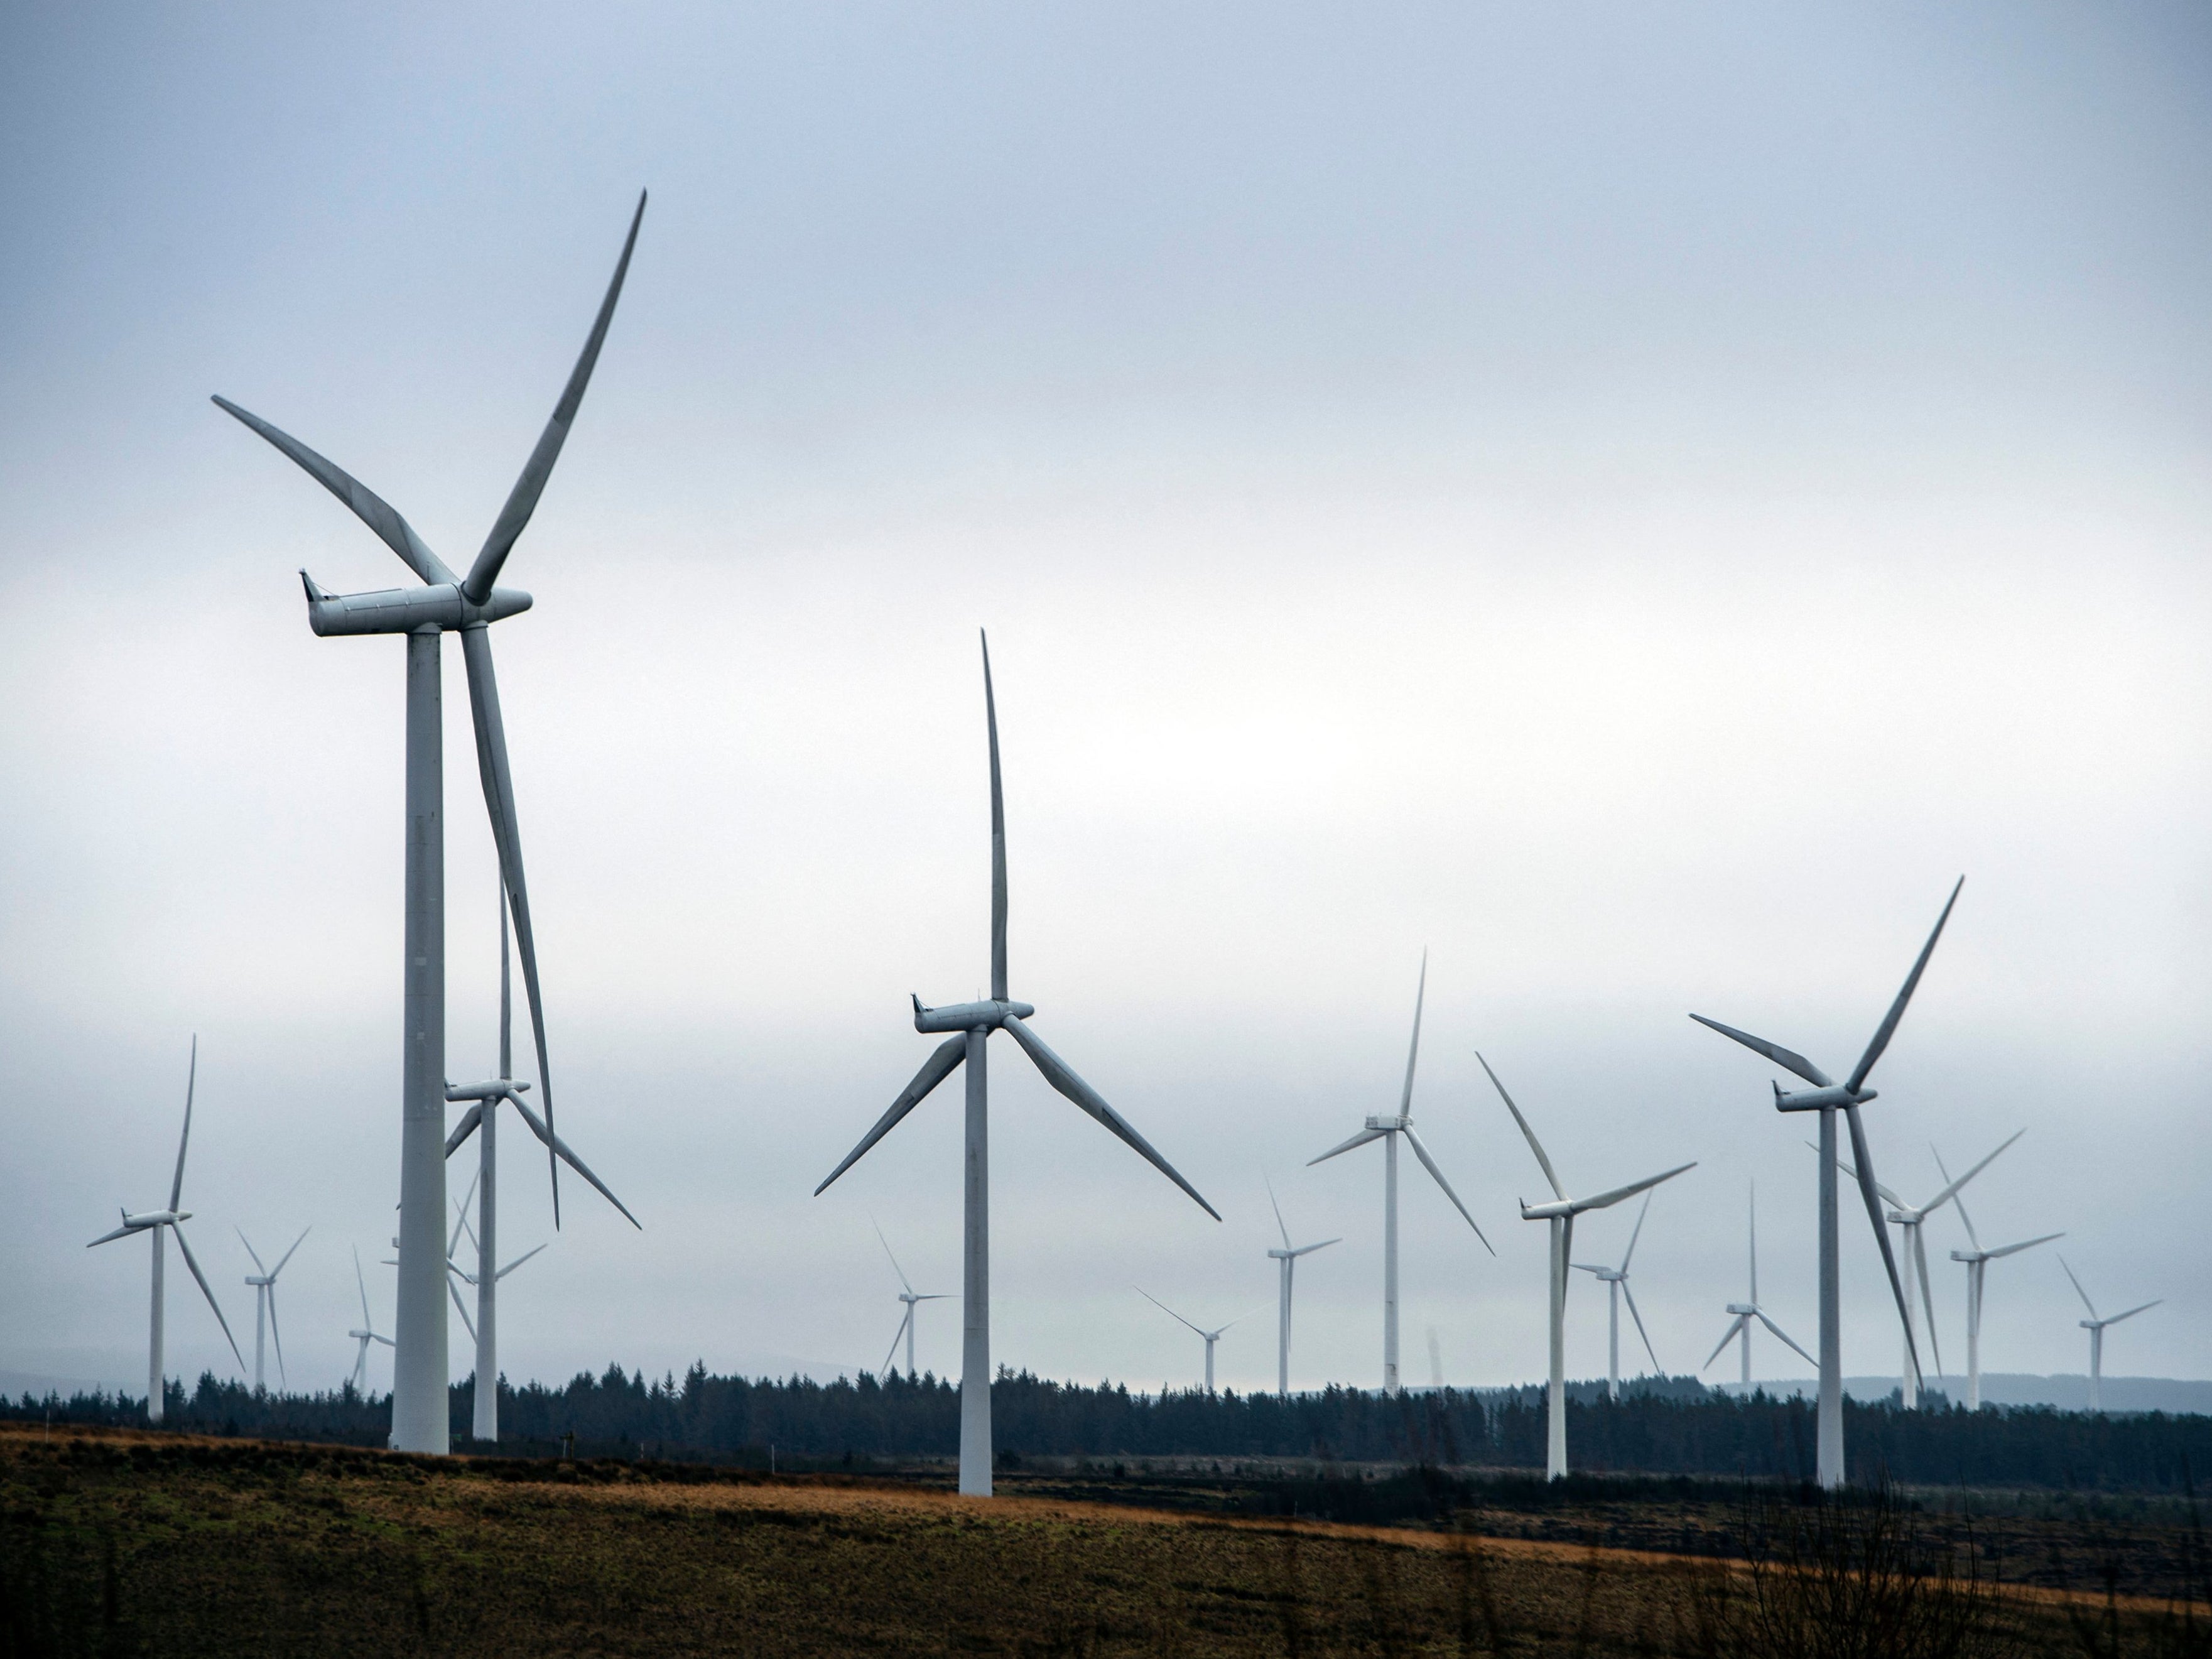 The energy crisis exposes the need to shift to renewables, experts and politicians say